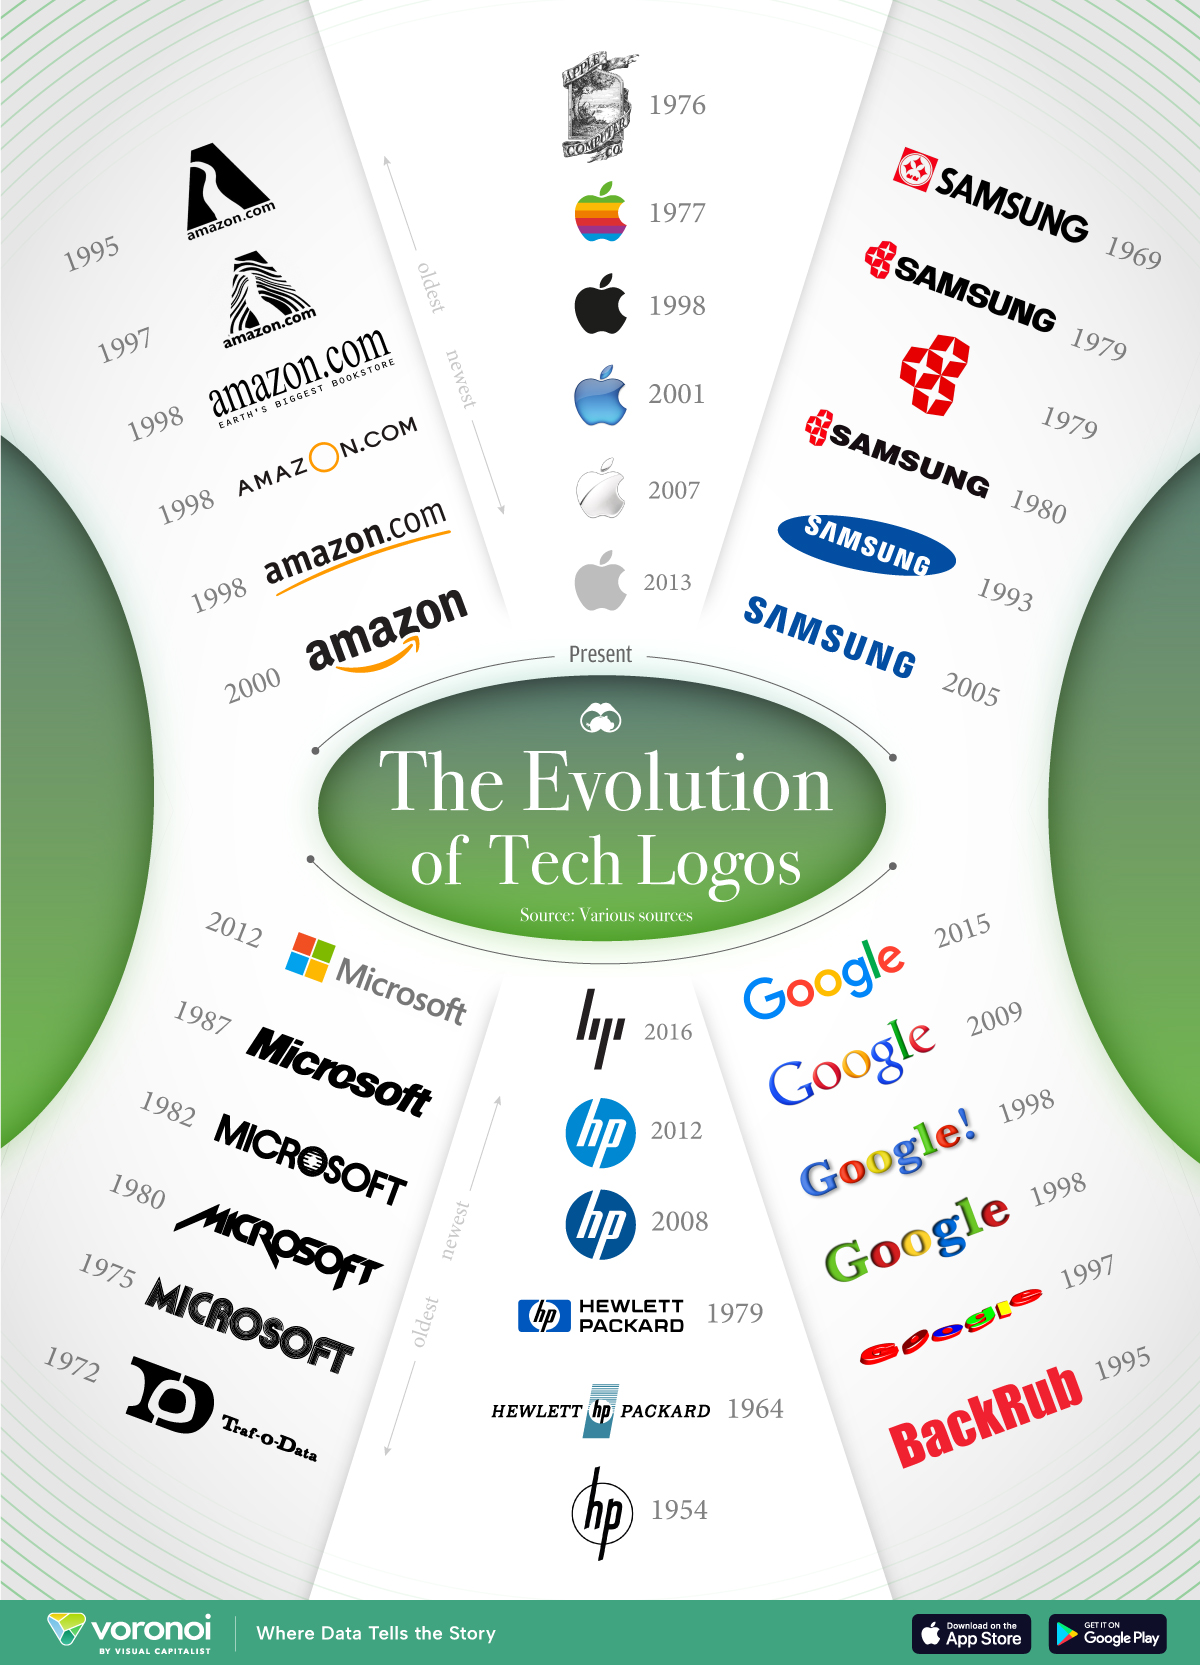 Graphic showing how tech logos changed over time